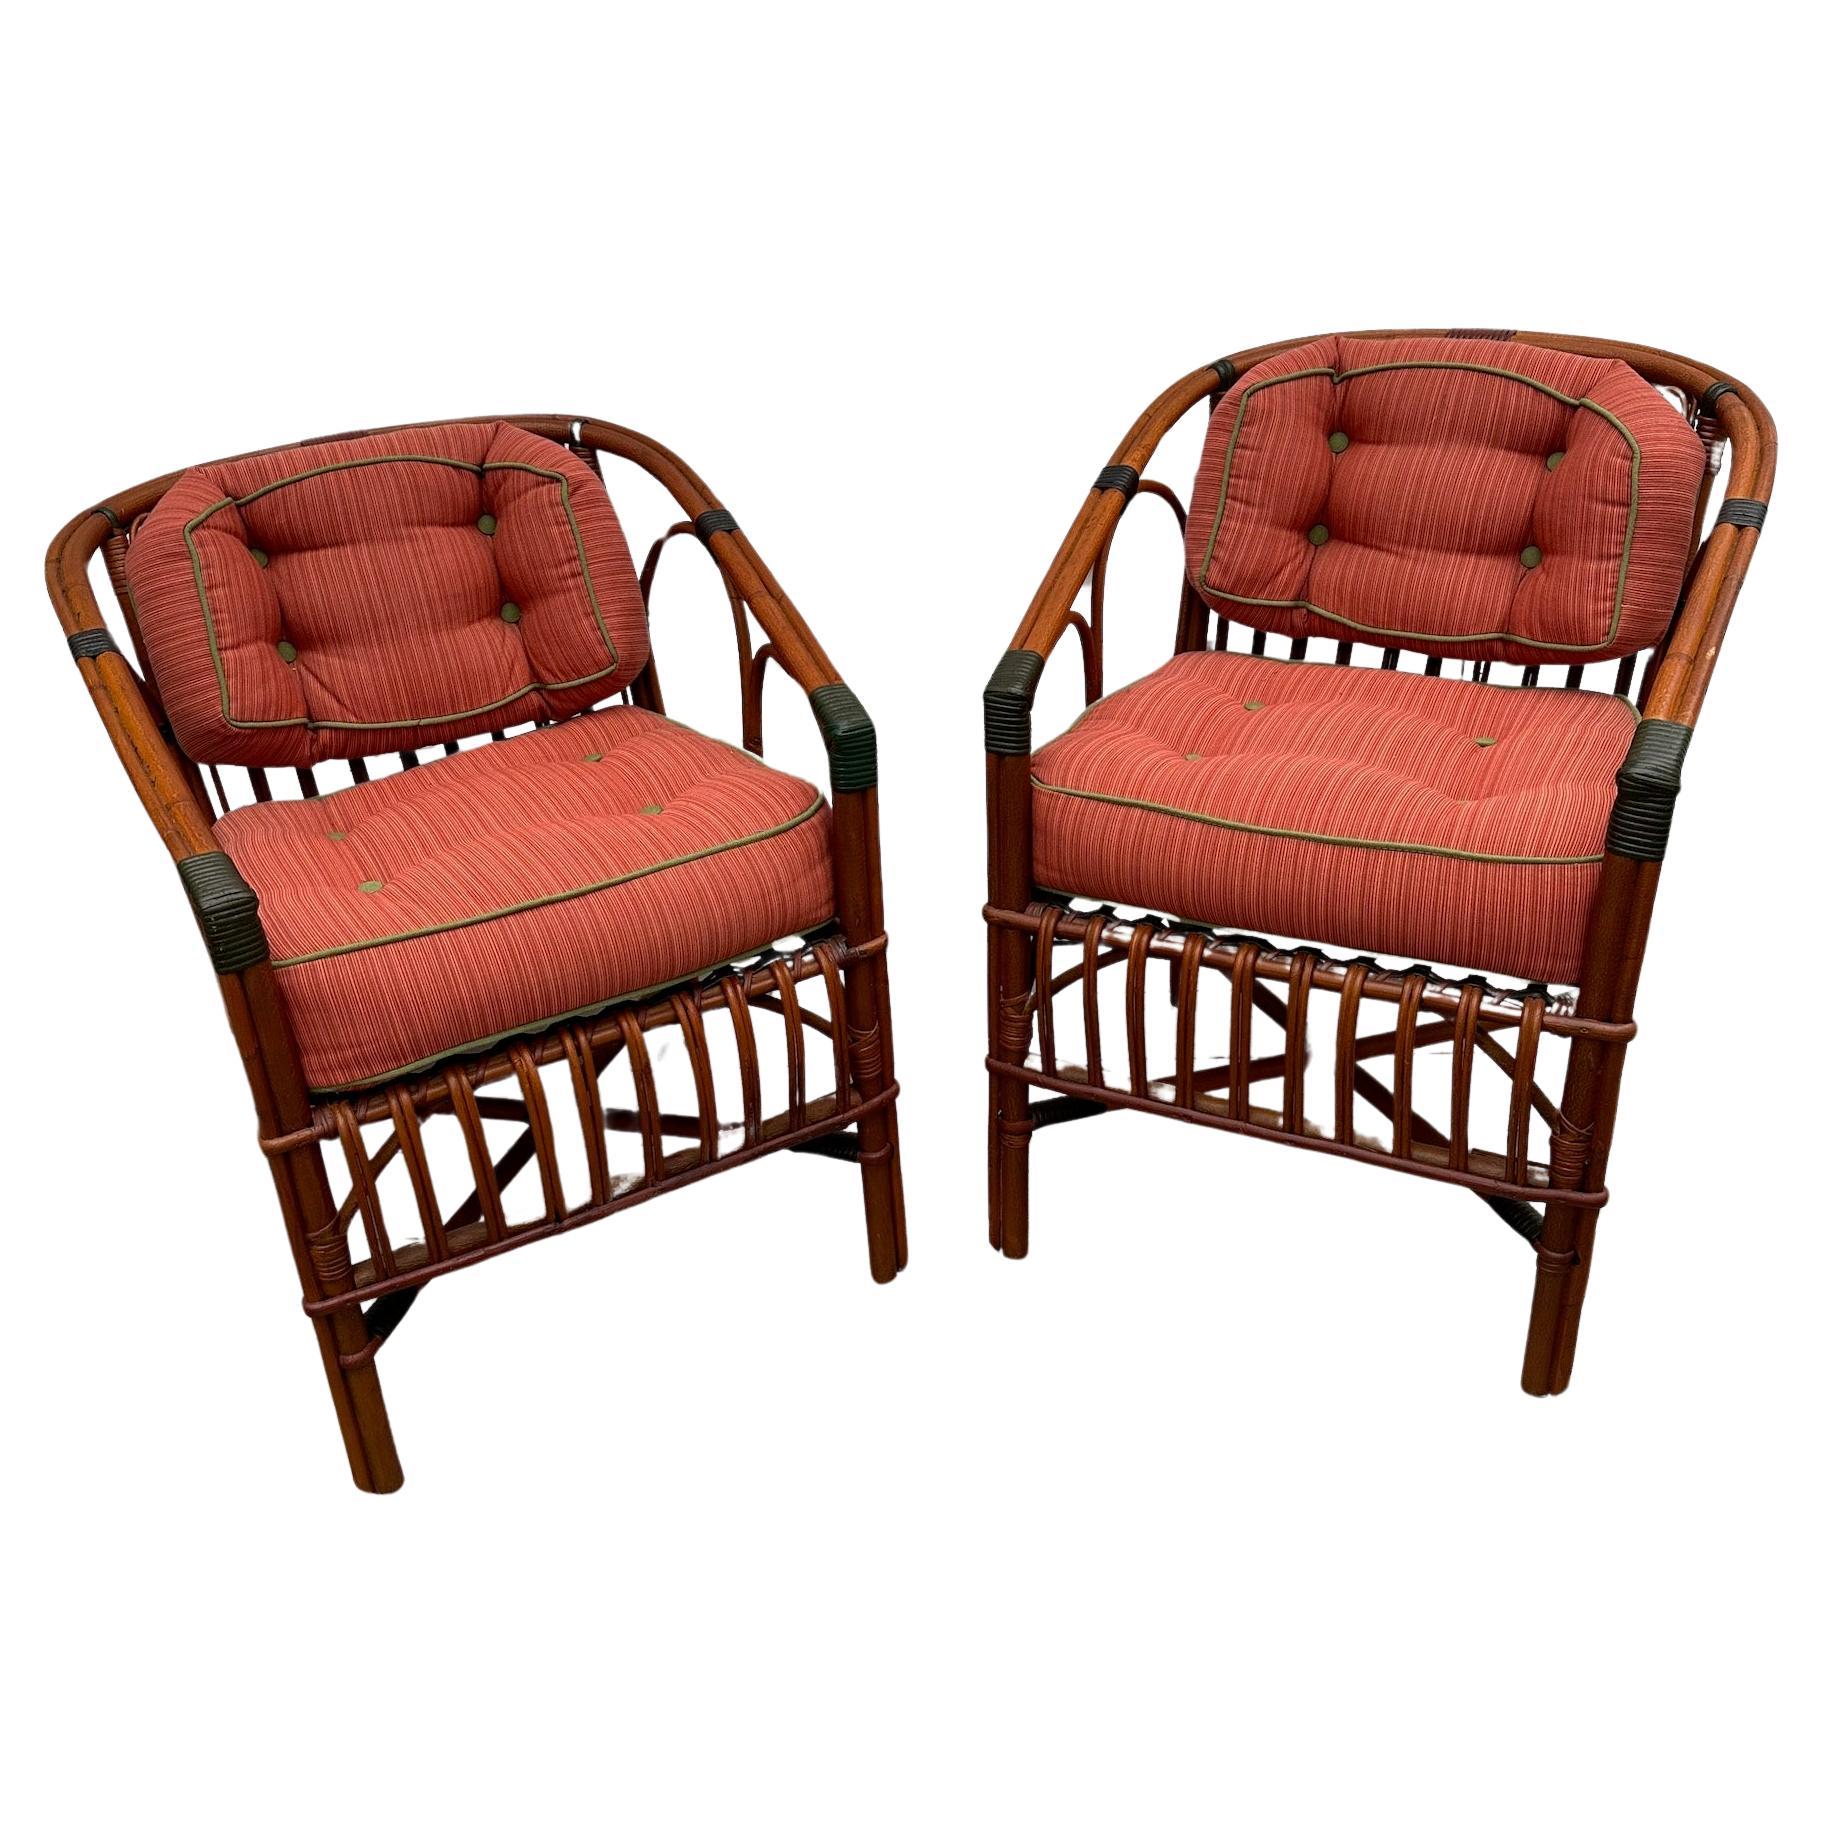 Pair of Antique Rattan Arm / Dining Chairs For Sale